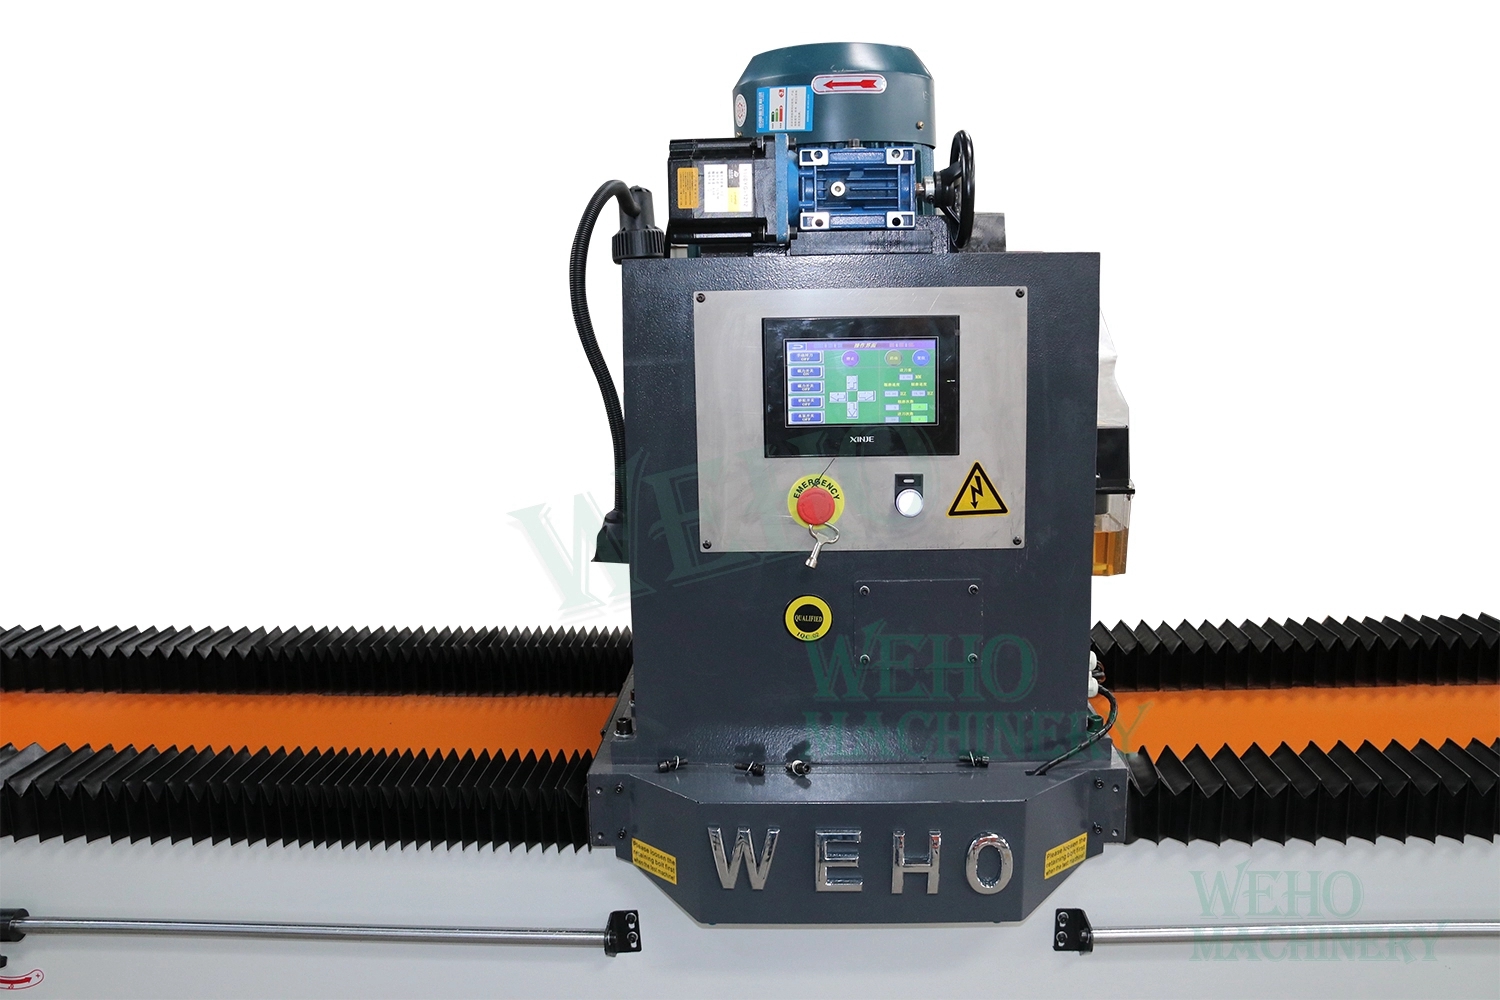 Vertical Automatic Knife Grinding Machine, 1440 Rpm, Size: 210x80x72 Cm